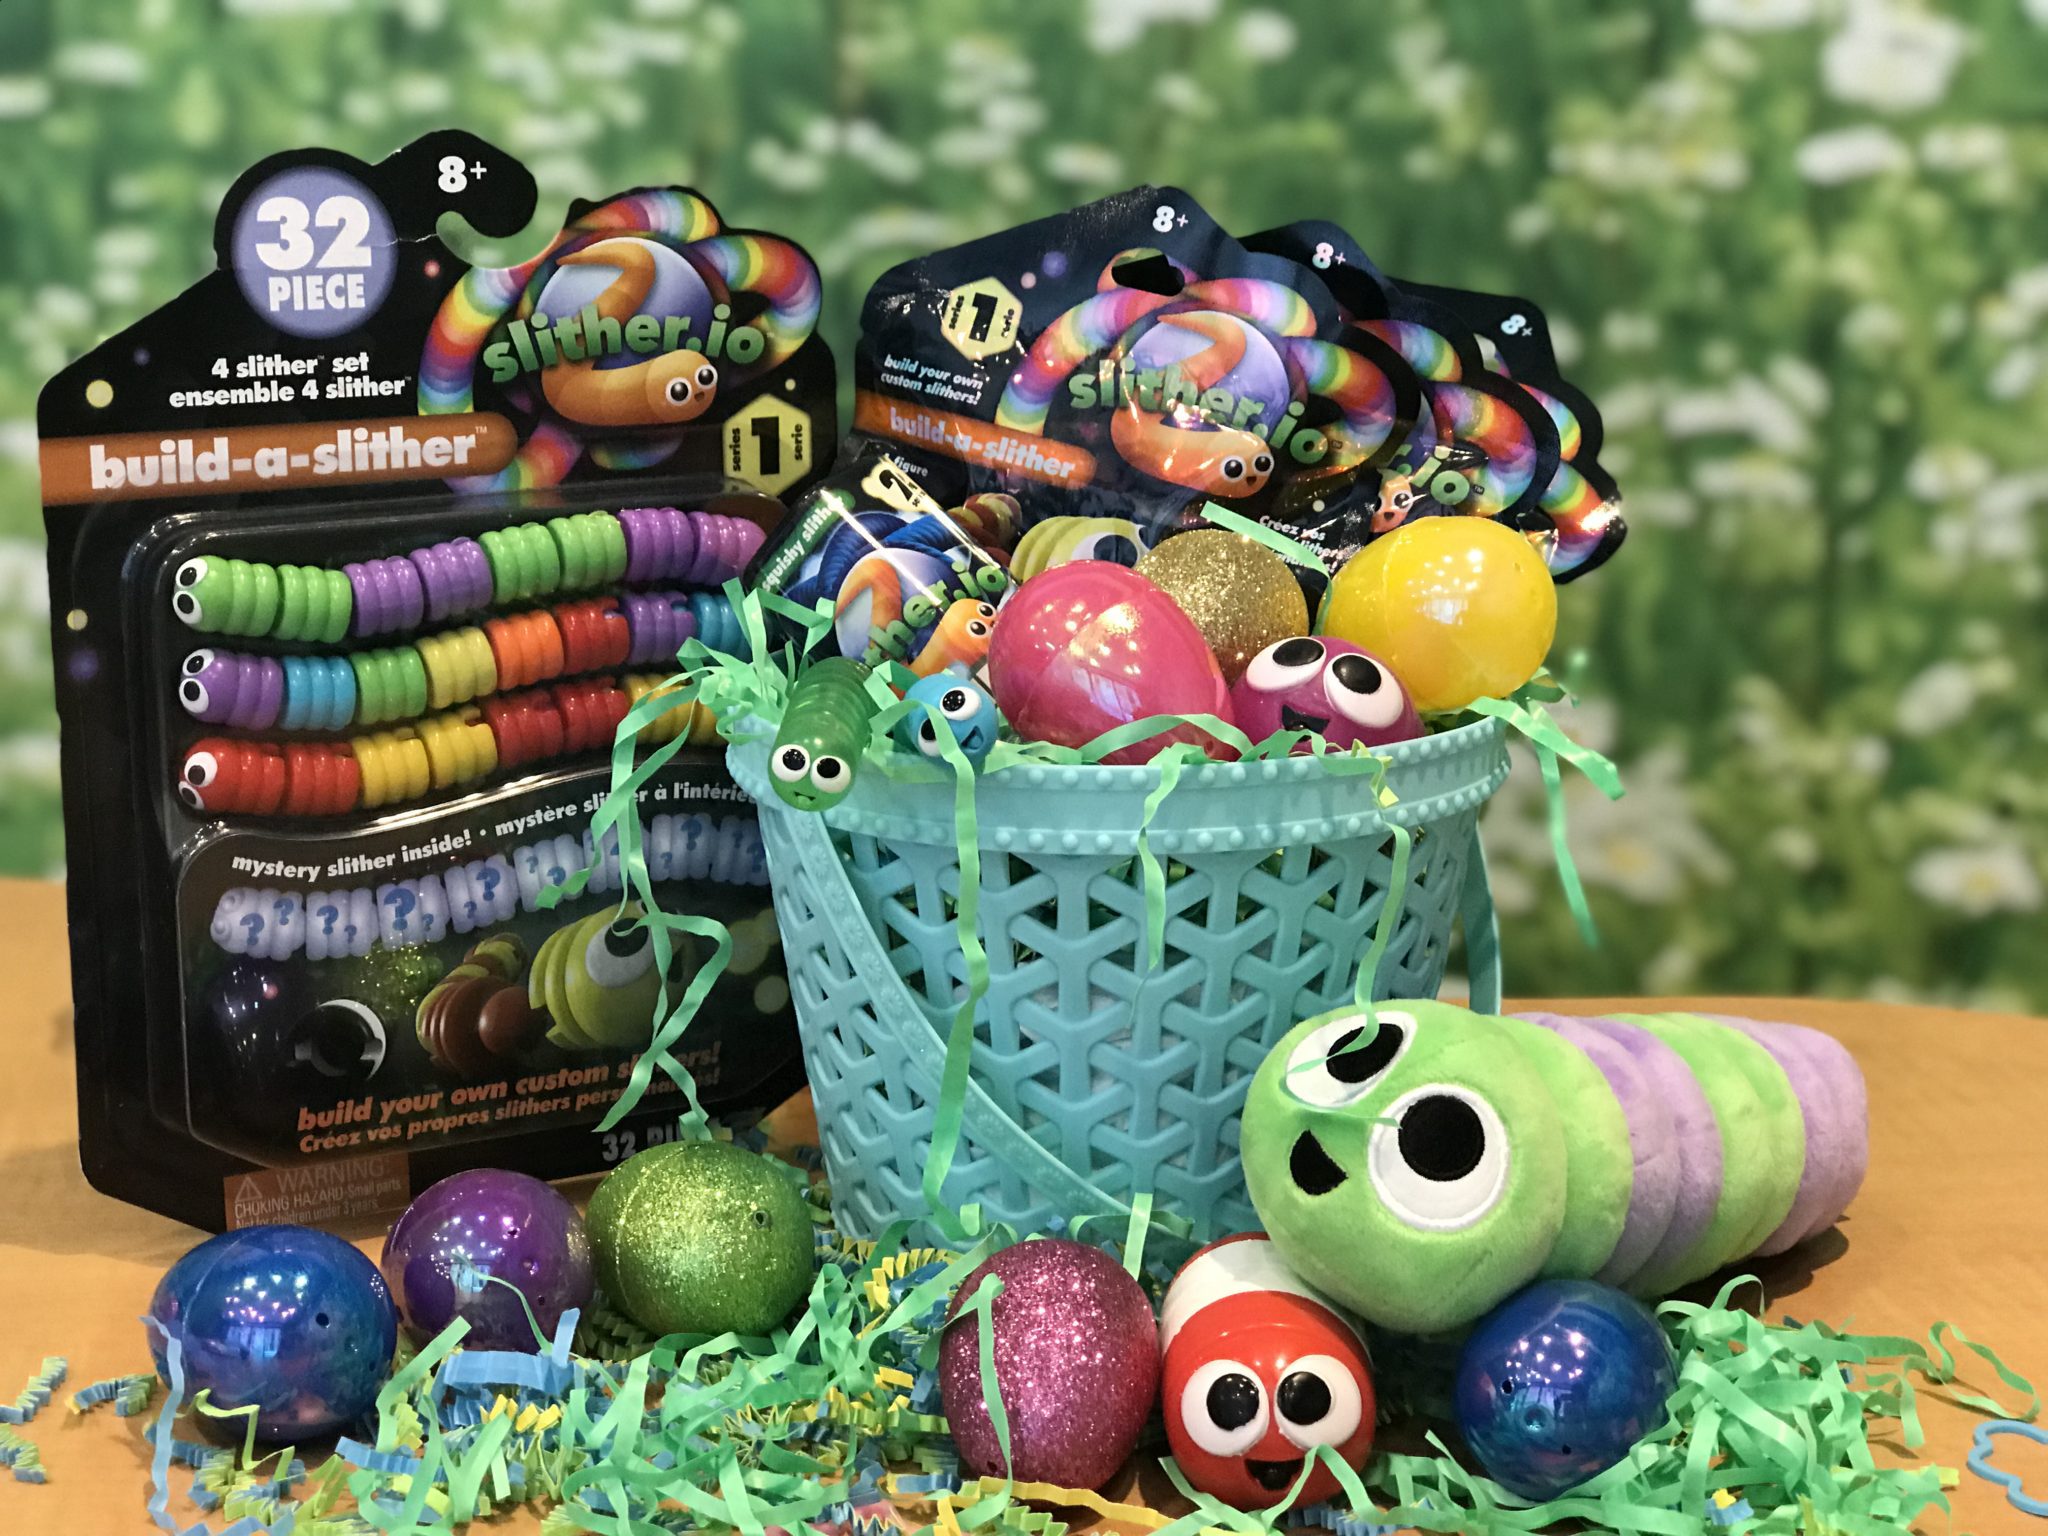 Bonkers Slither.io Series 1 Build-a-slither 32 PC 4 Slither Set